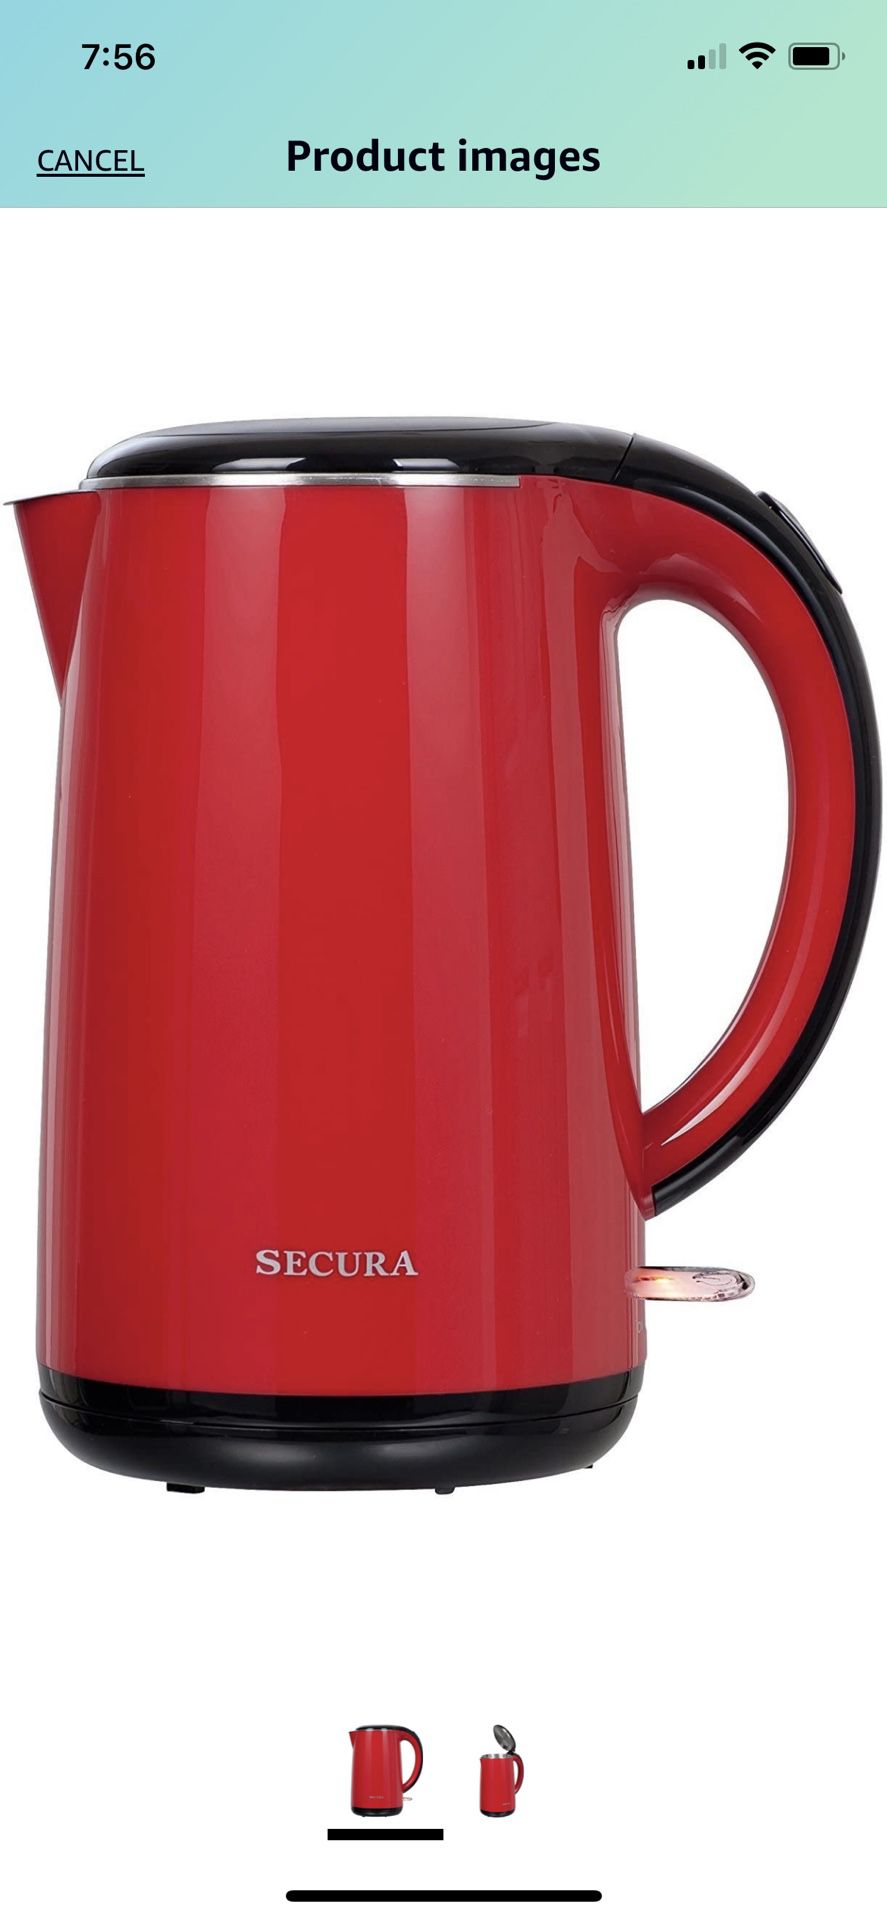 SECURA ELECTRIC STAINLESS STEEL WATER KETTLE COOL TOUCH WORKING PRE-OWNED